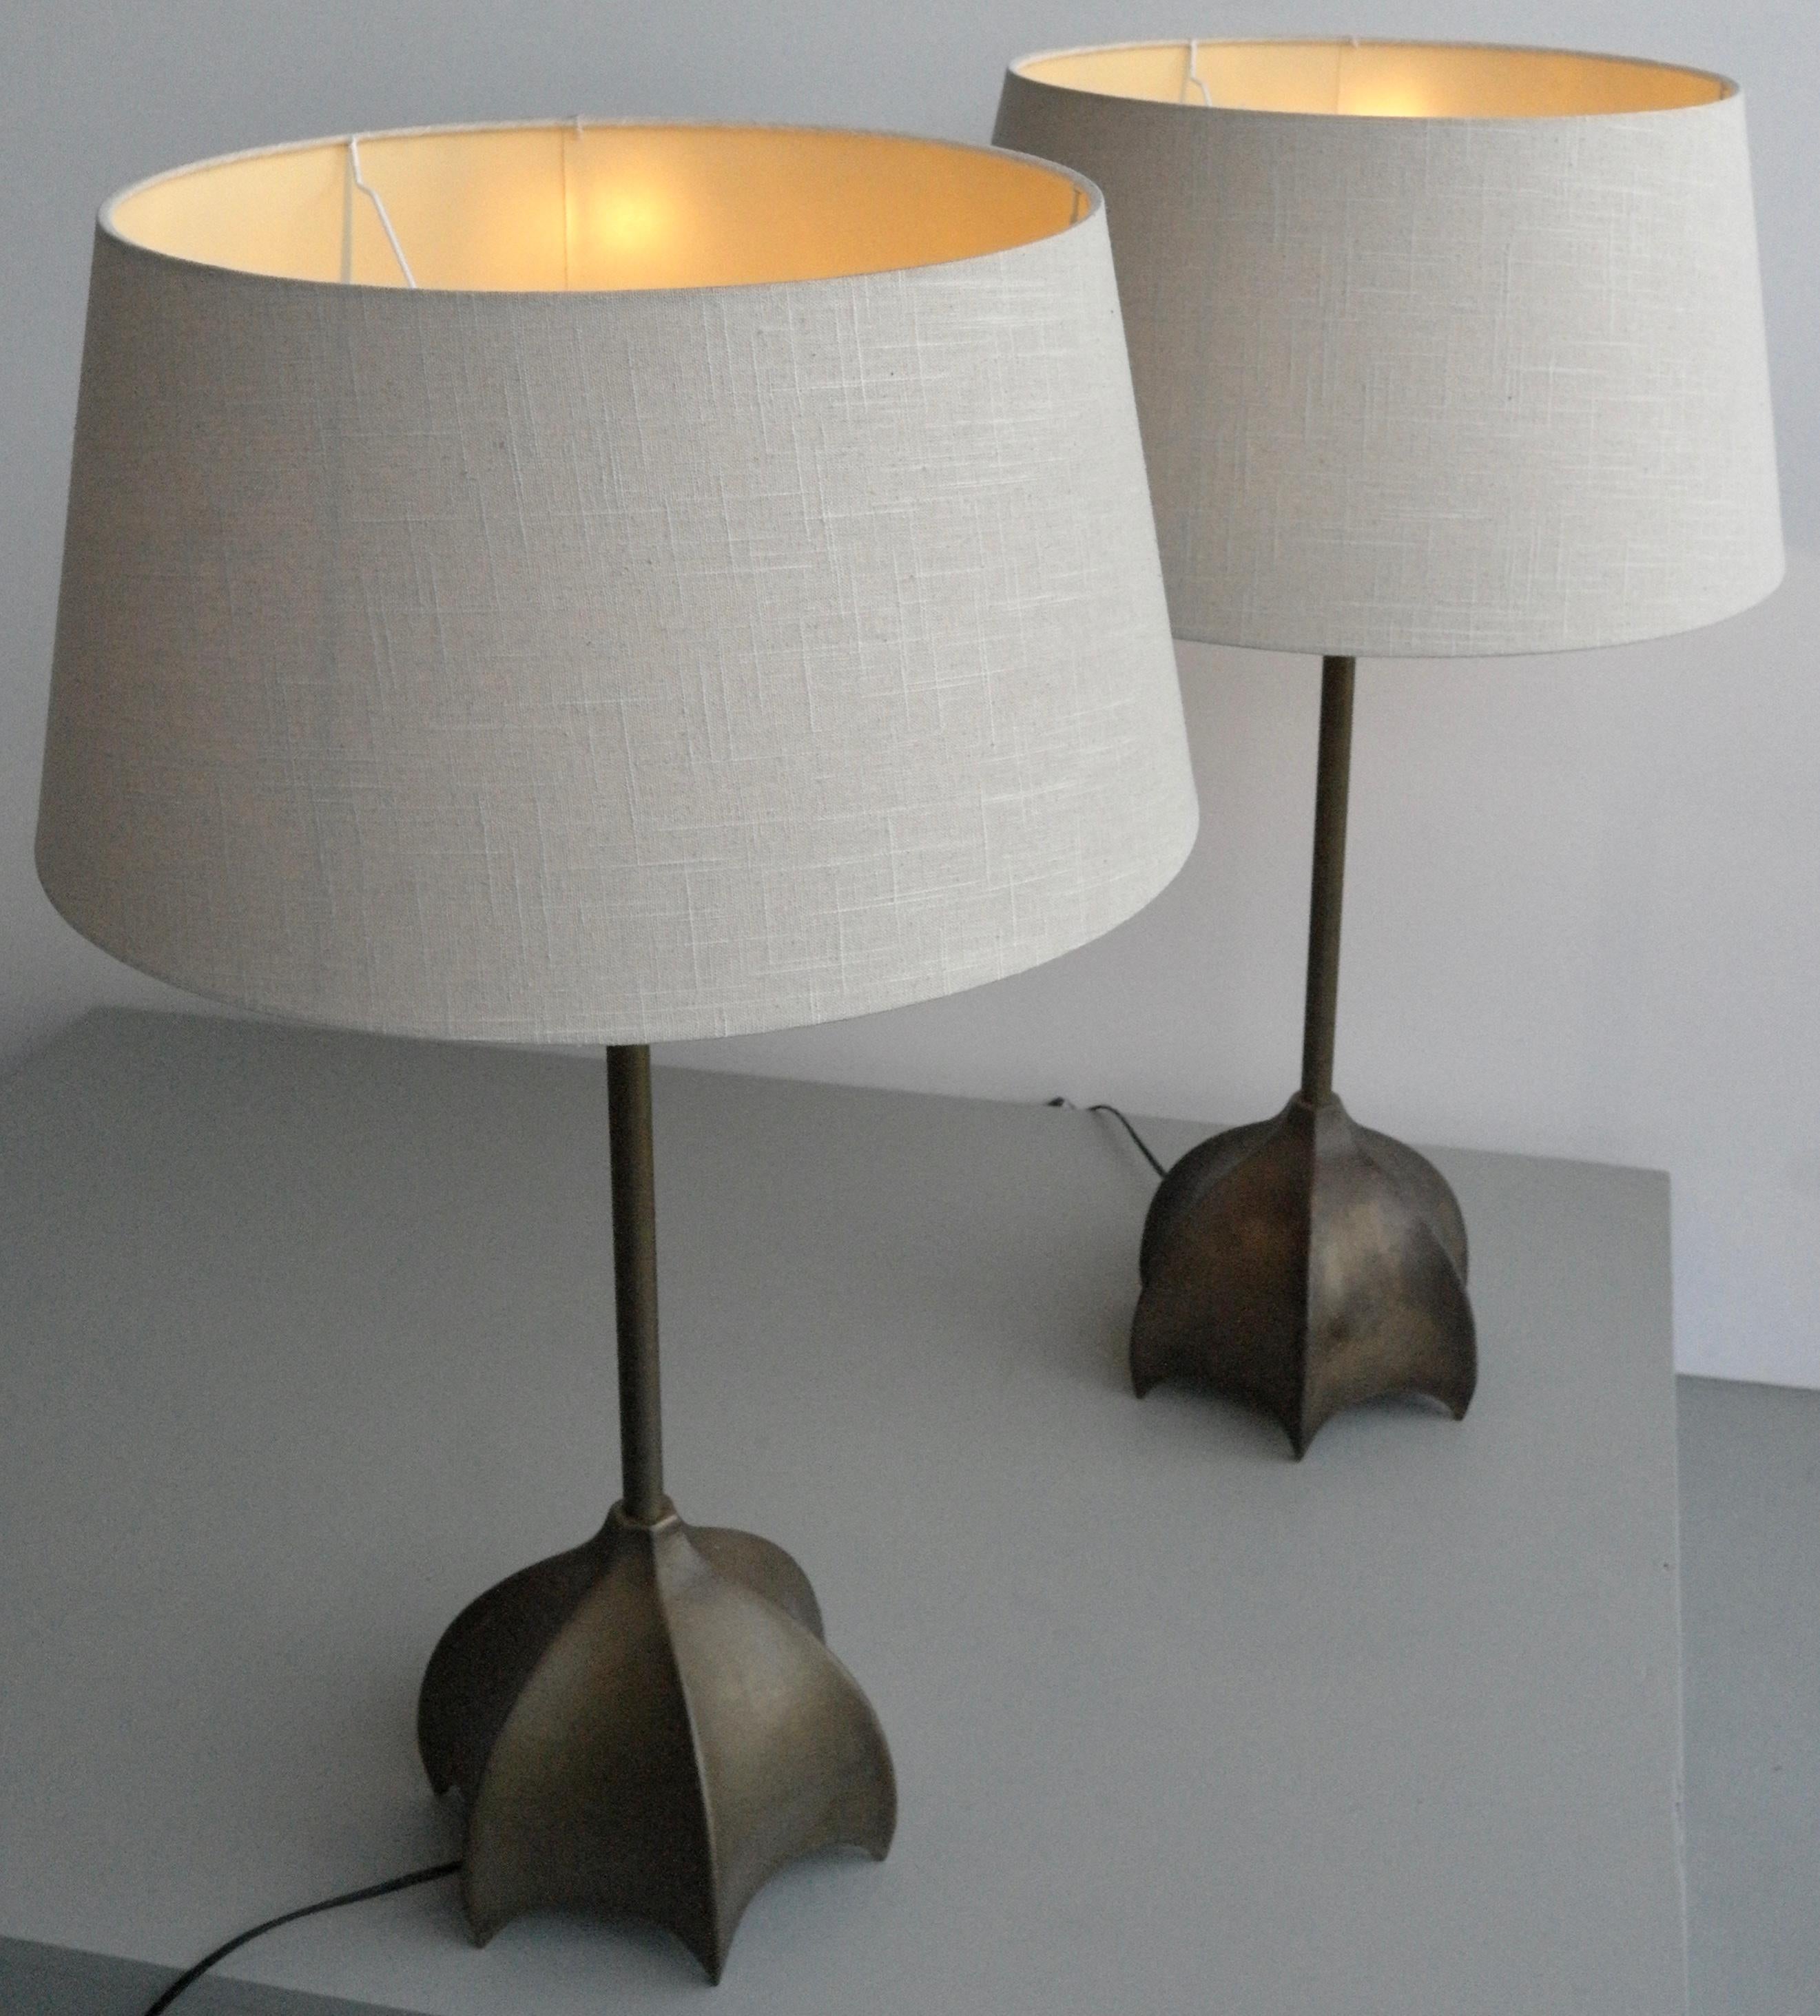 Pair of large bronze and brass table lamps, France, 1960s.